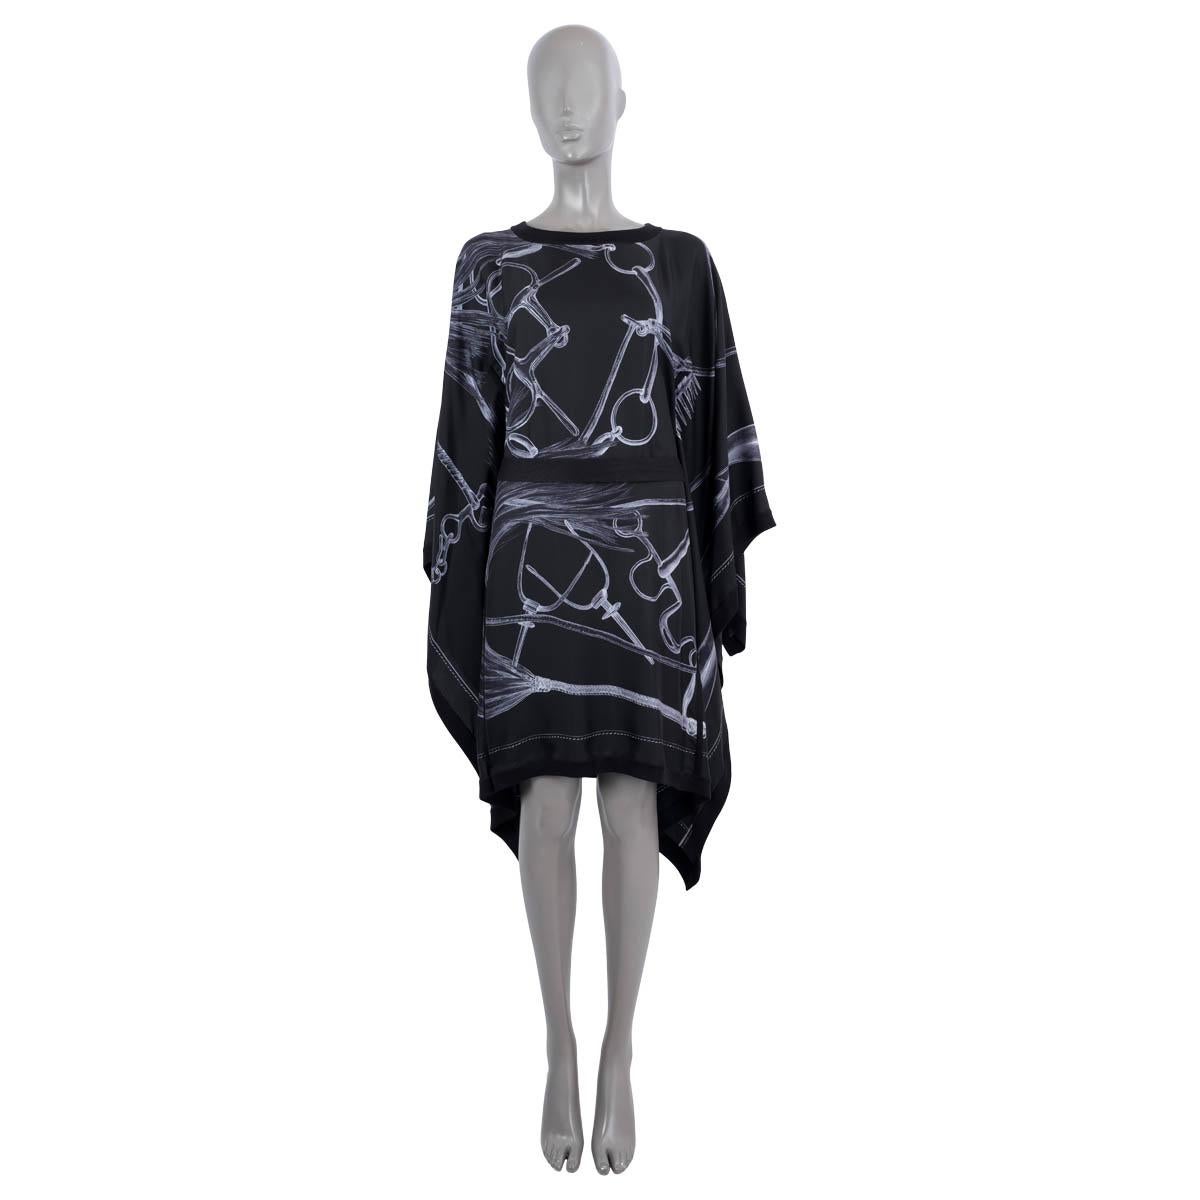 100% authentic Hermès Projects Carre au Crayon belted dress in black and gray silk (100%) and the knit part in black silk (85%) and cashmere (15%). Features a detachable belt and belt loops. Unlined. Has been worn once and is in virtually new